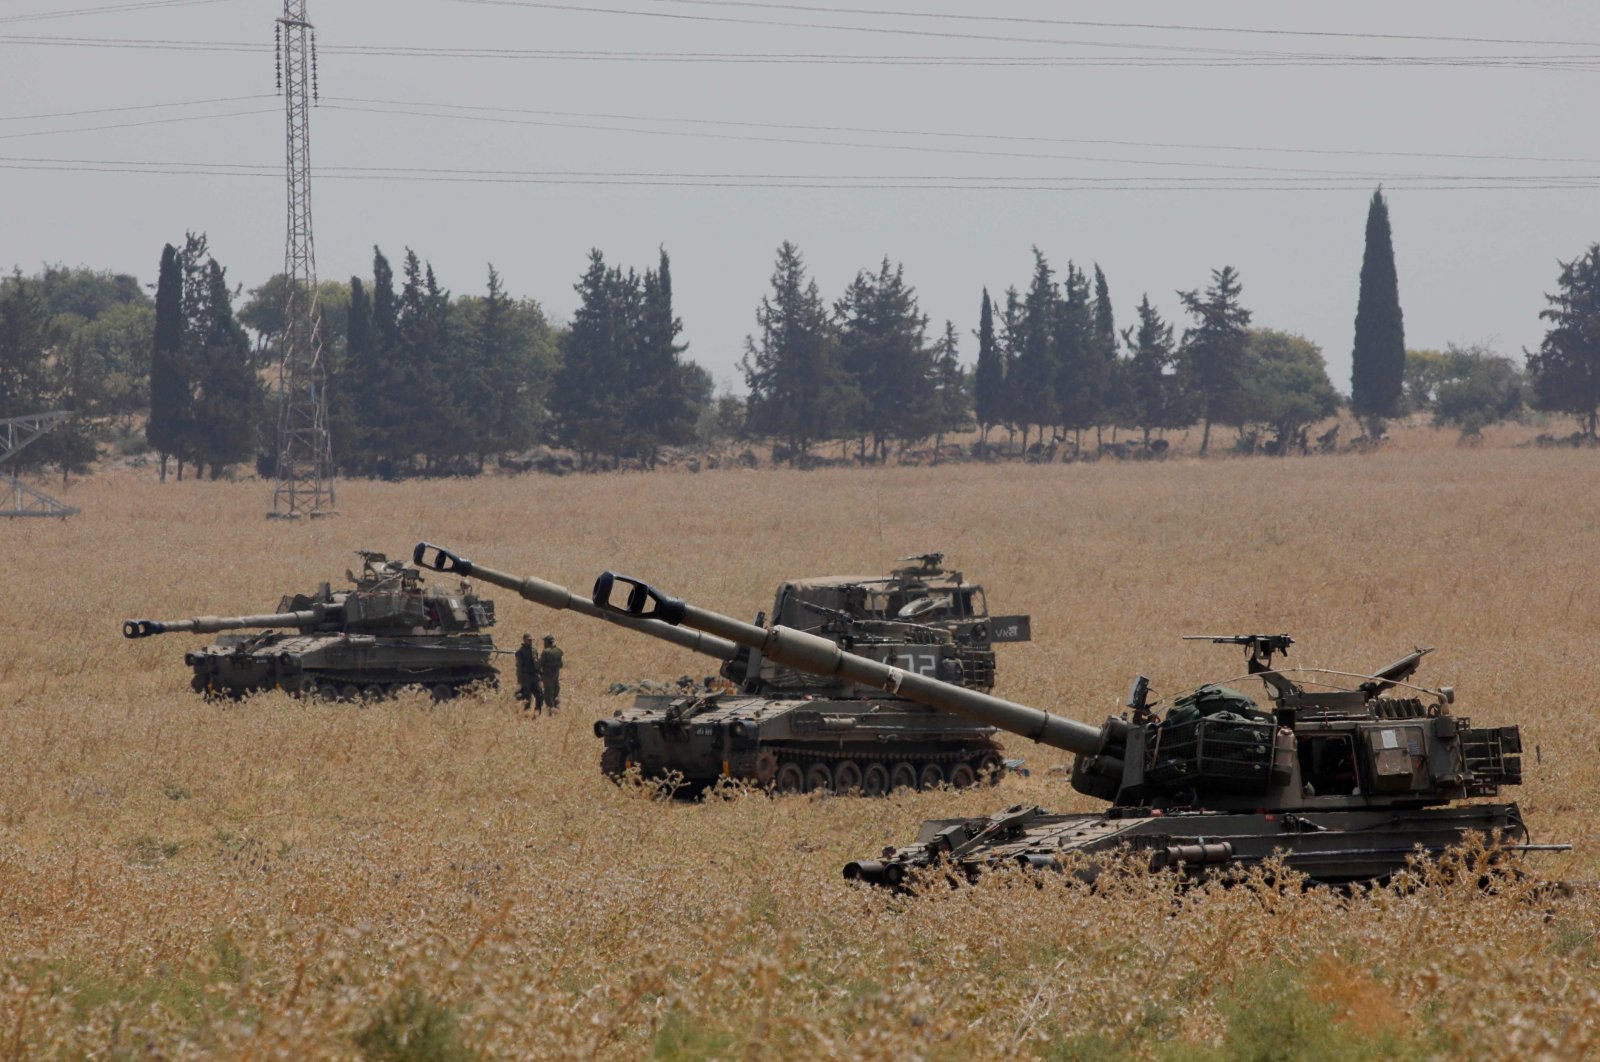 Israeli forces deploy 155-mm self-propelled howitzers in Upper Galilee in northern Israel on the border with Lebanon, July 27, 2020. (AFP Photo)